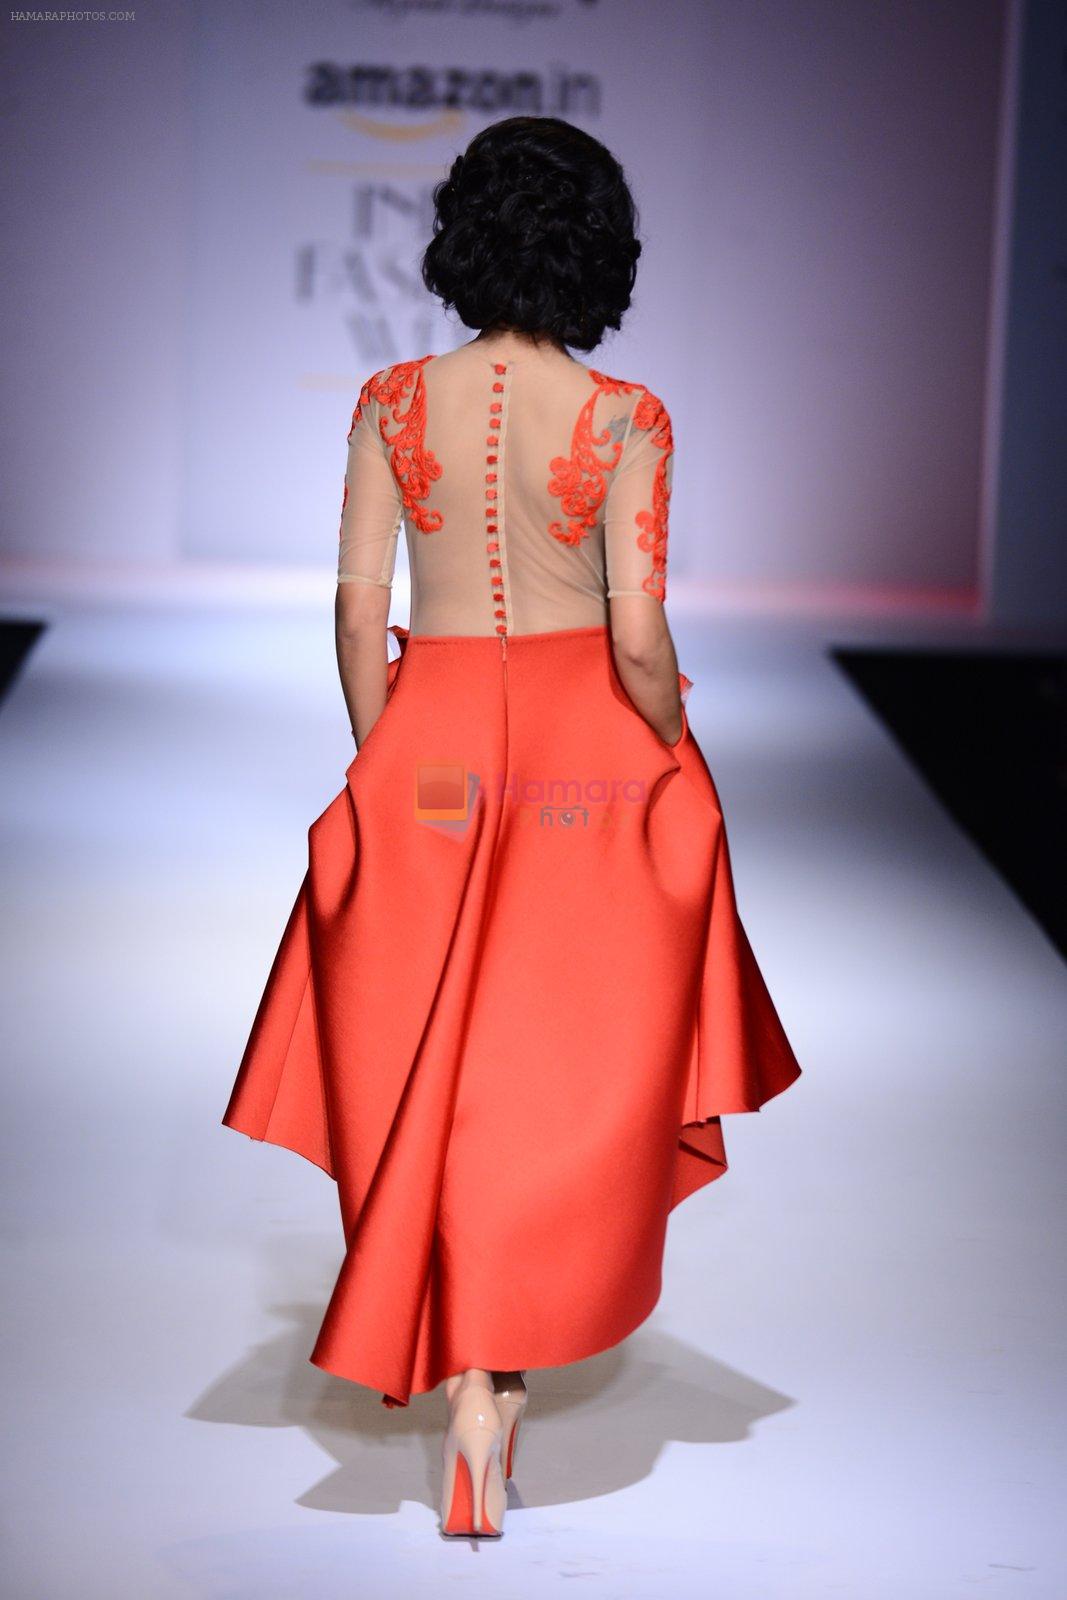 Sonal Chauhan walk the ramp for Nikhita on day 4 of Amazon India Fashion Week on 28th March 2015